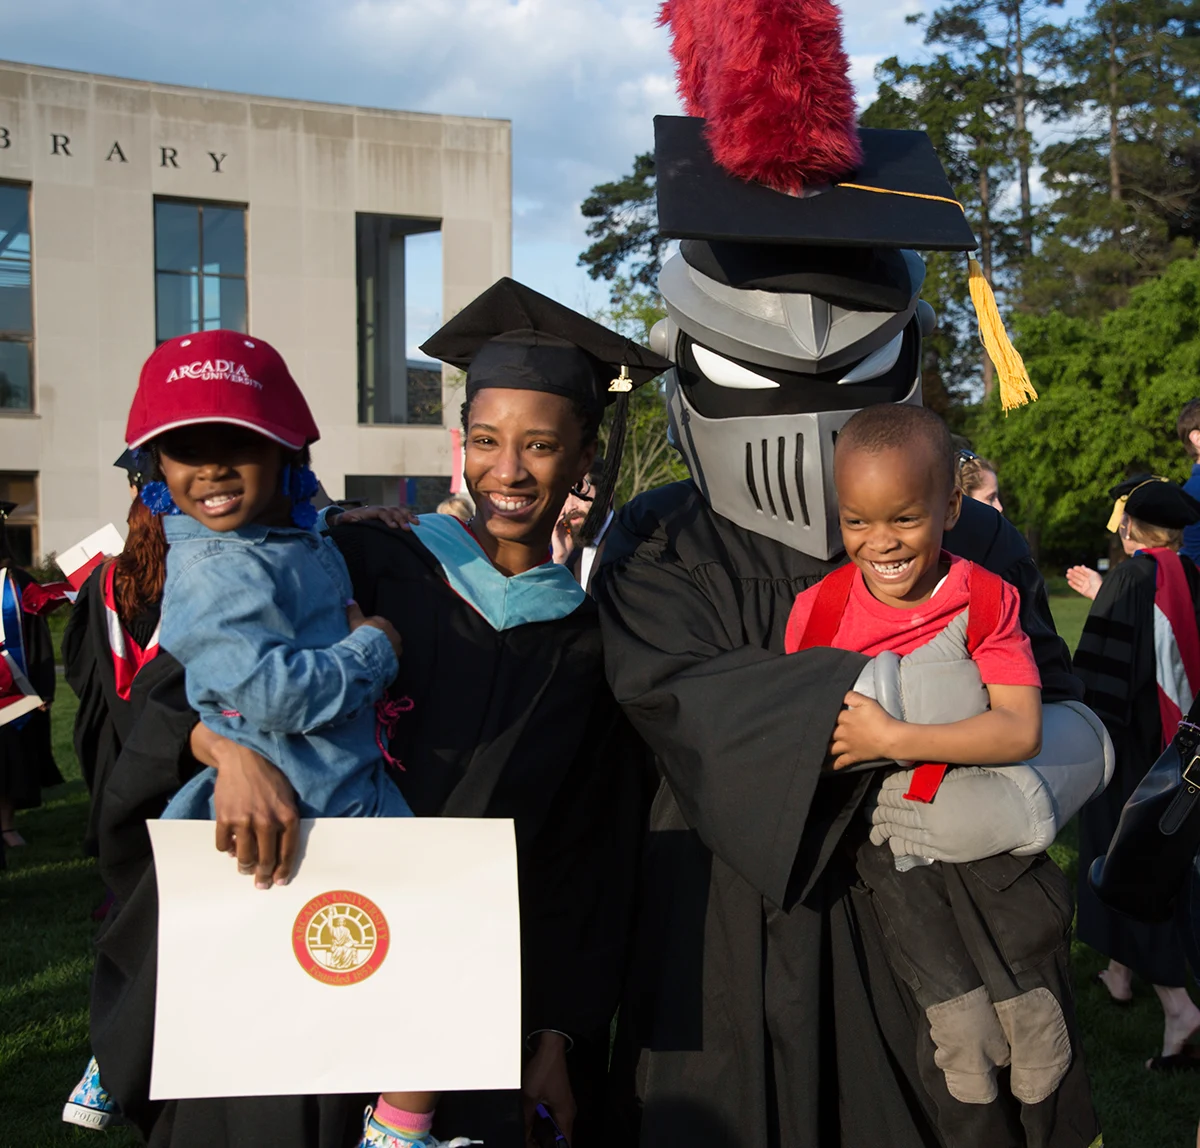 Graduating student posing with her children and Archie, the mascot.